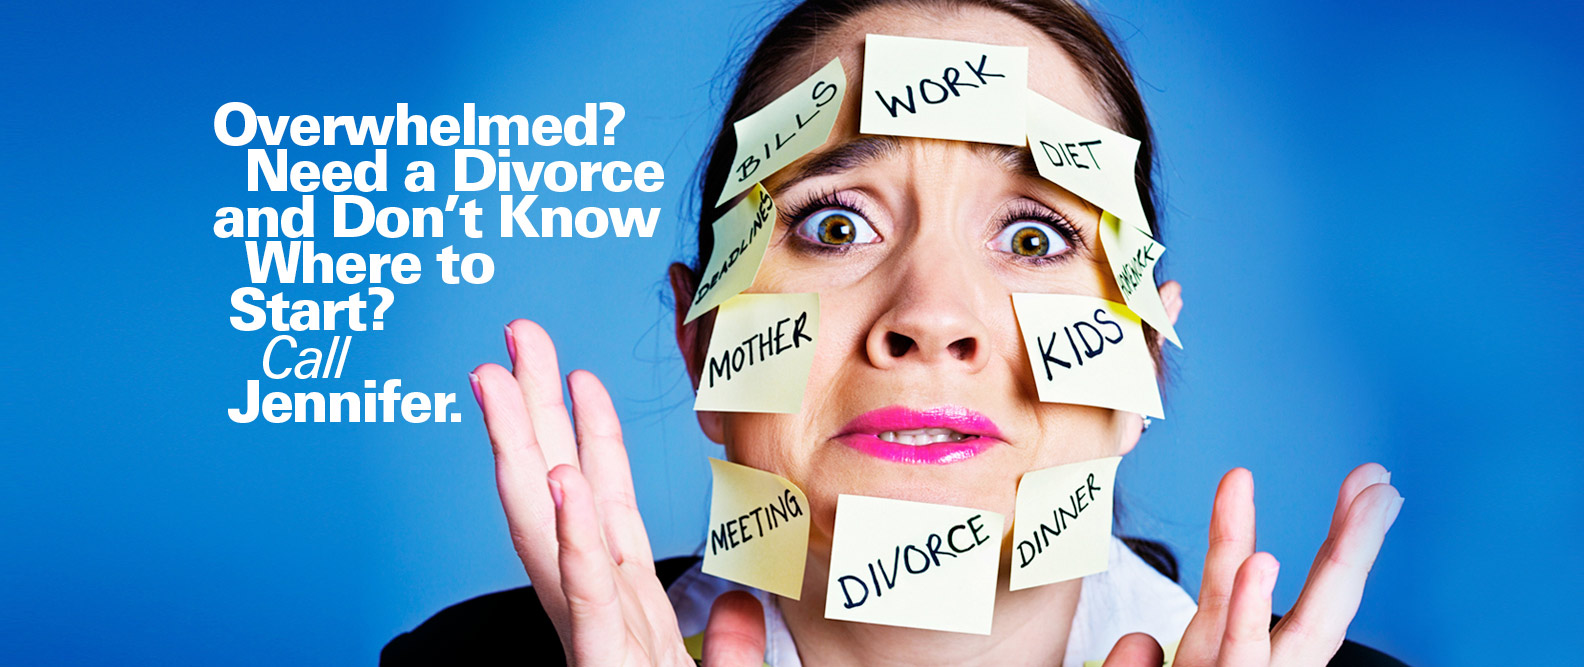 Overwhelmed? Need a divorce and don't know where to start? Call Jennifer!